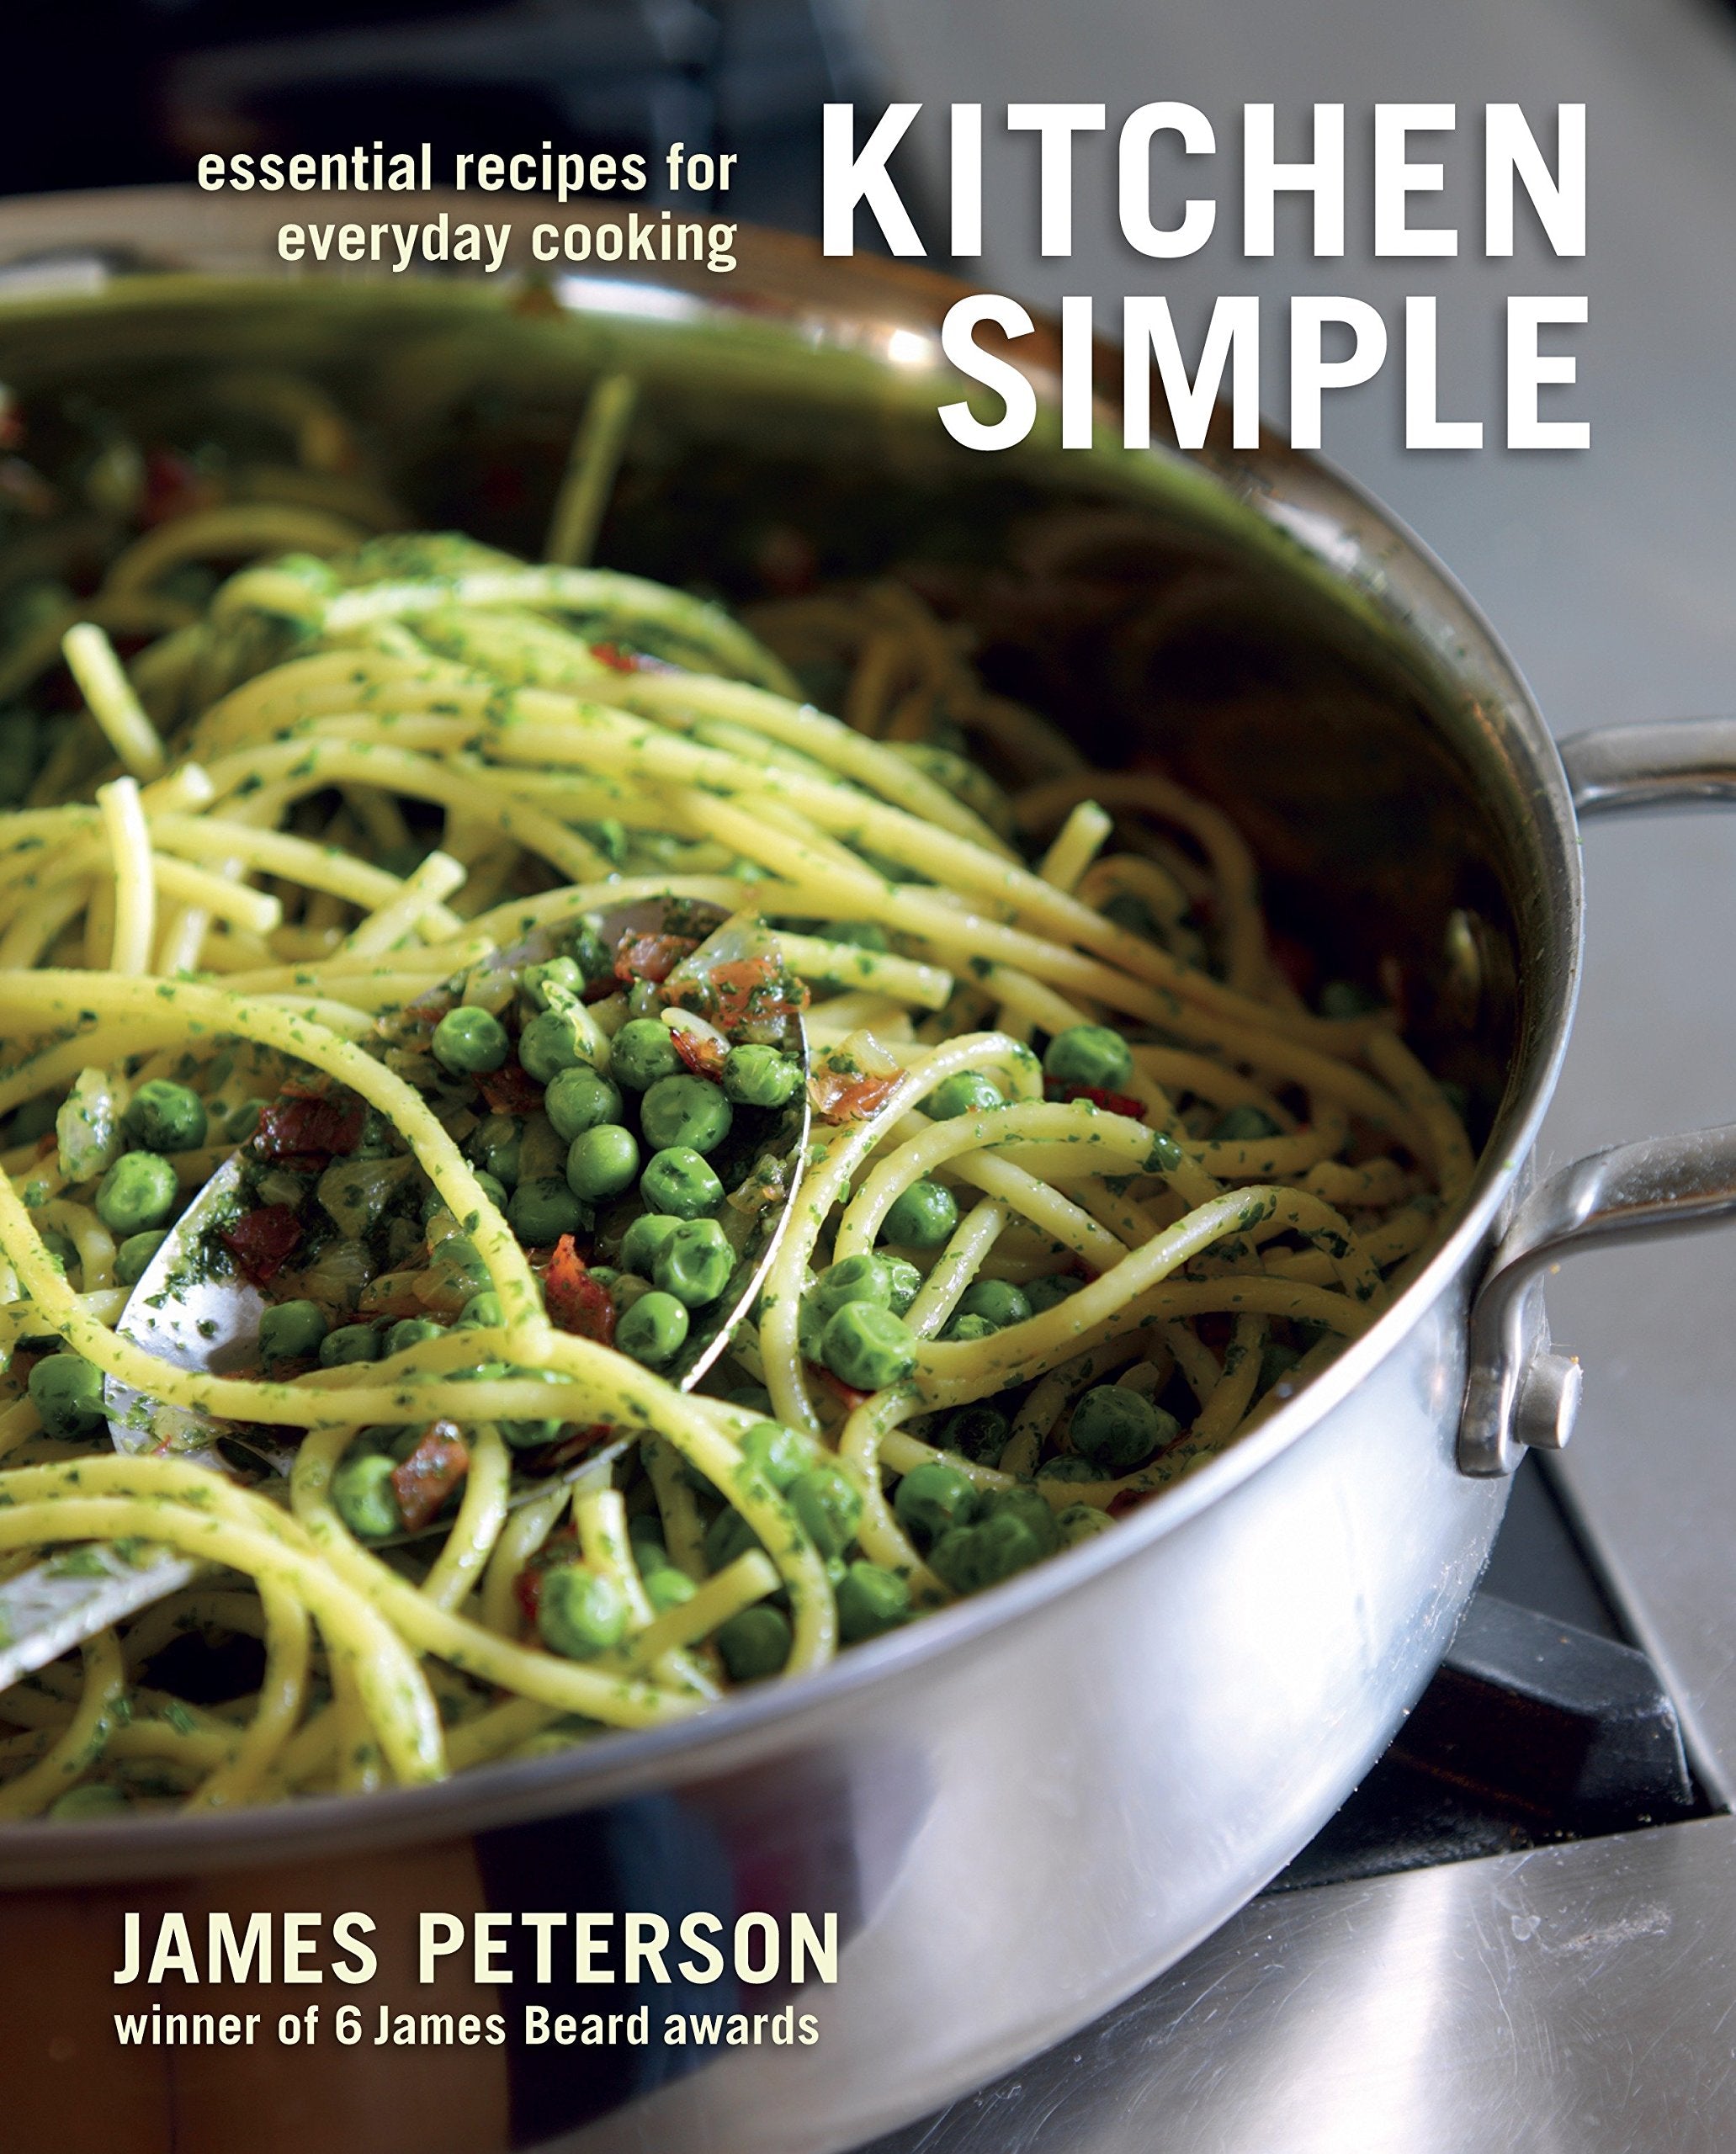 Kitchen Simple: Essential Recipes for Everyday Cooking (James Peterson)